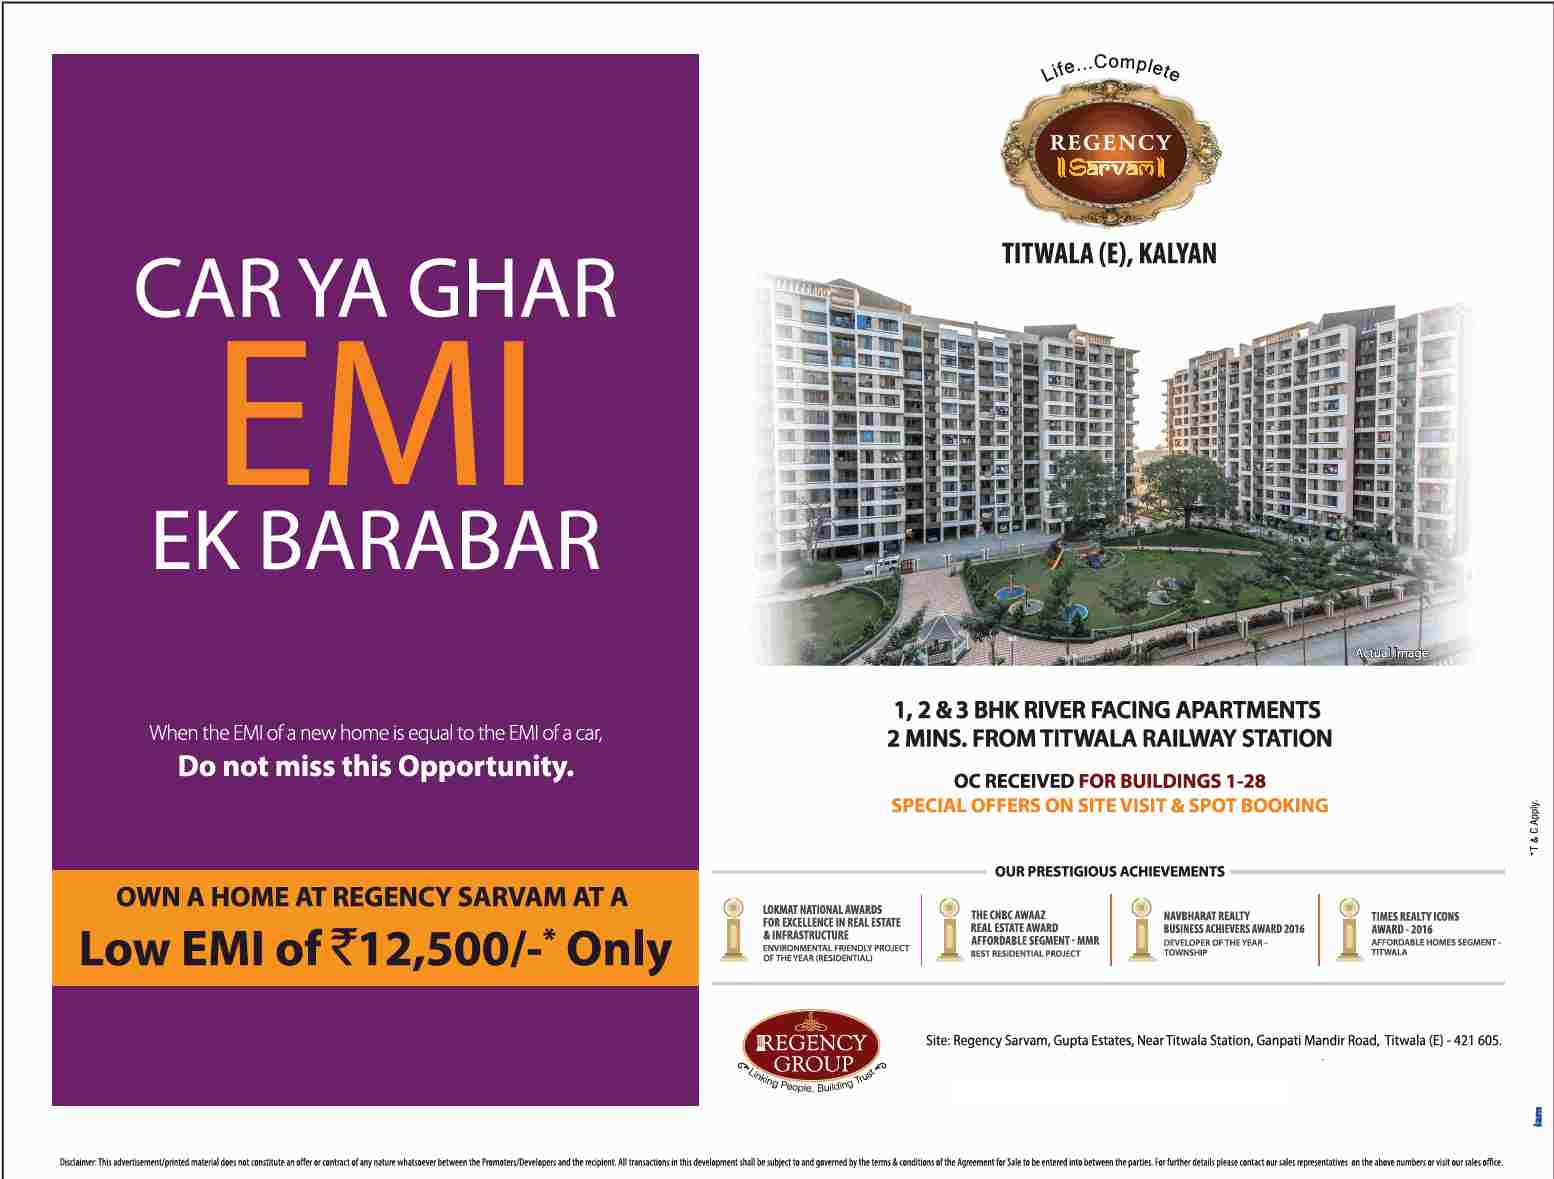 Own a home with low EMI of Rs. 12,500 at Regency Sarvam in Mumbai